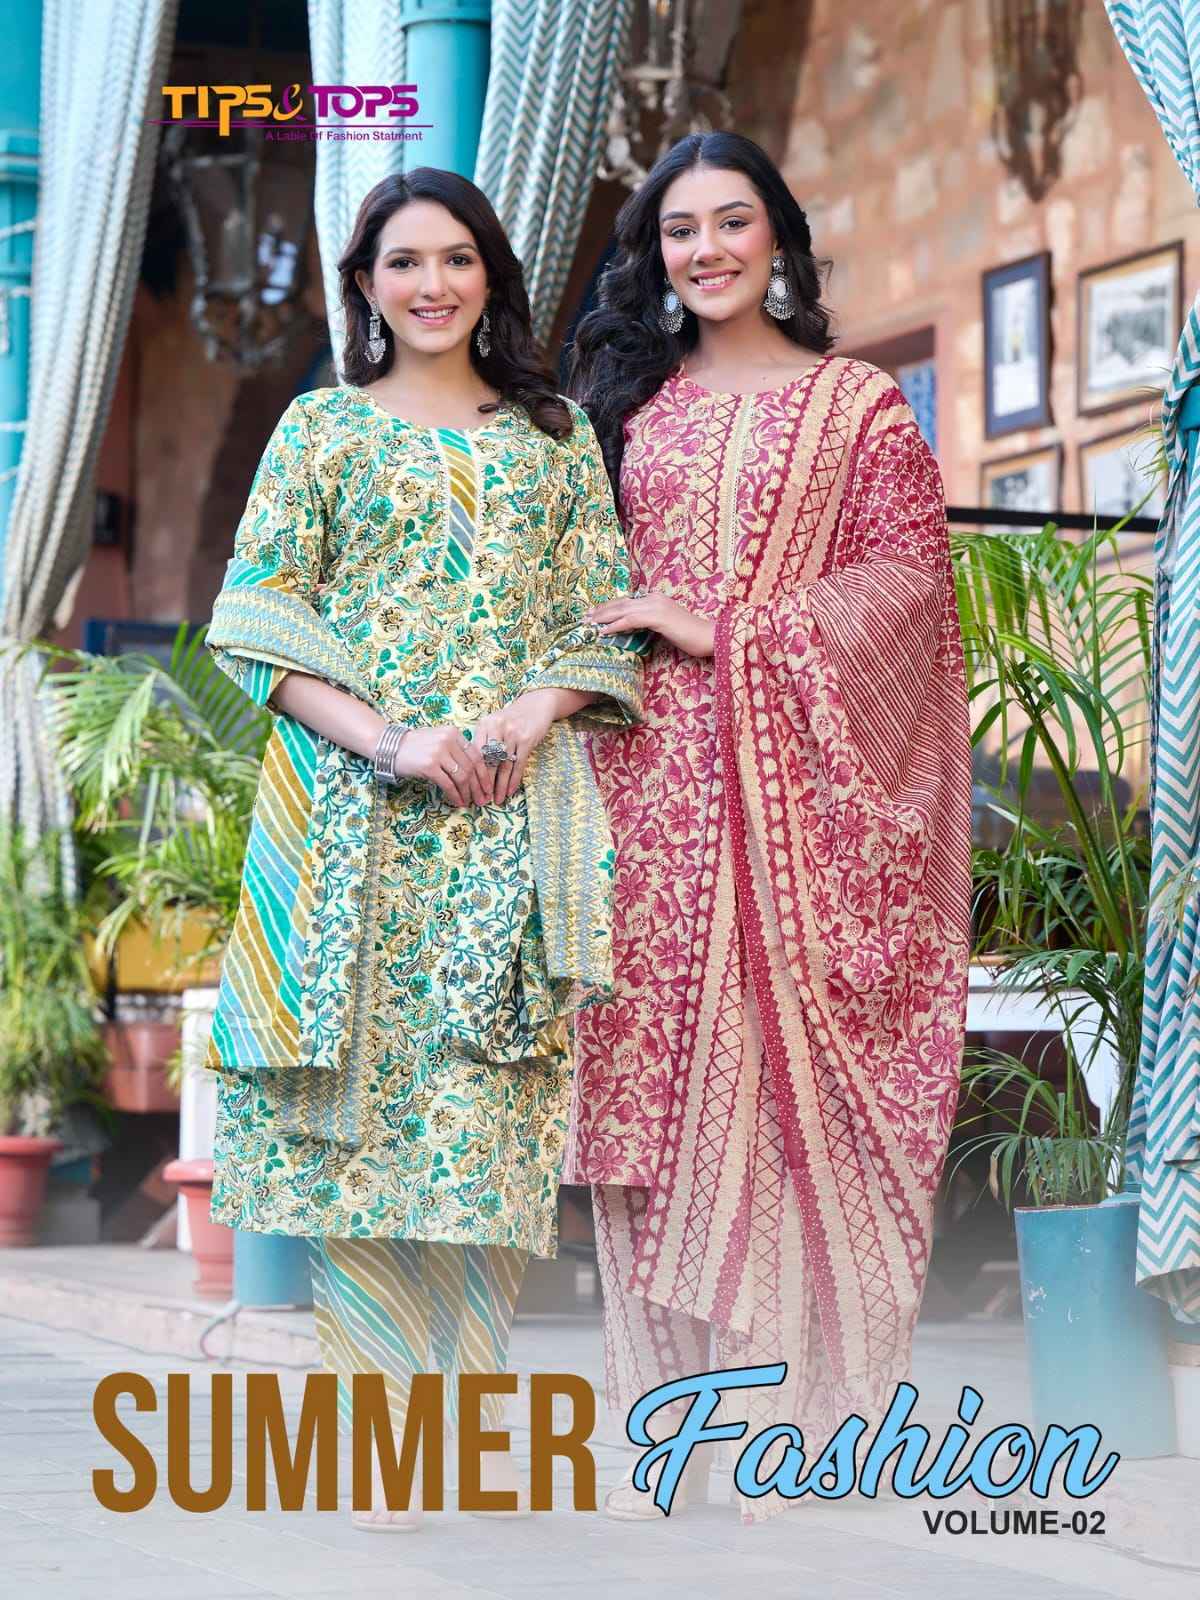 Tips & Tops Summer Fashion Vol-2 Readymade Suit 6 pc Cataloge